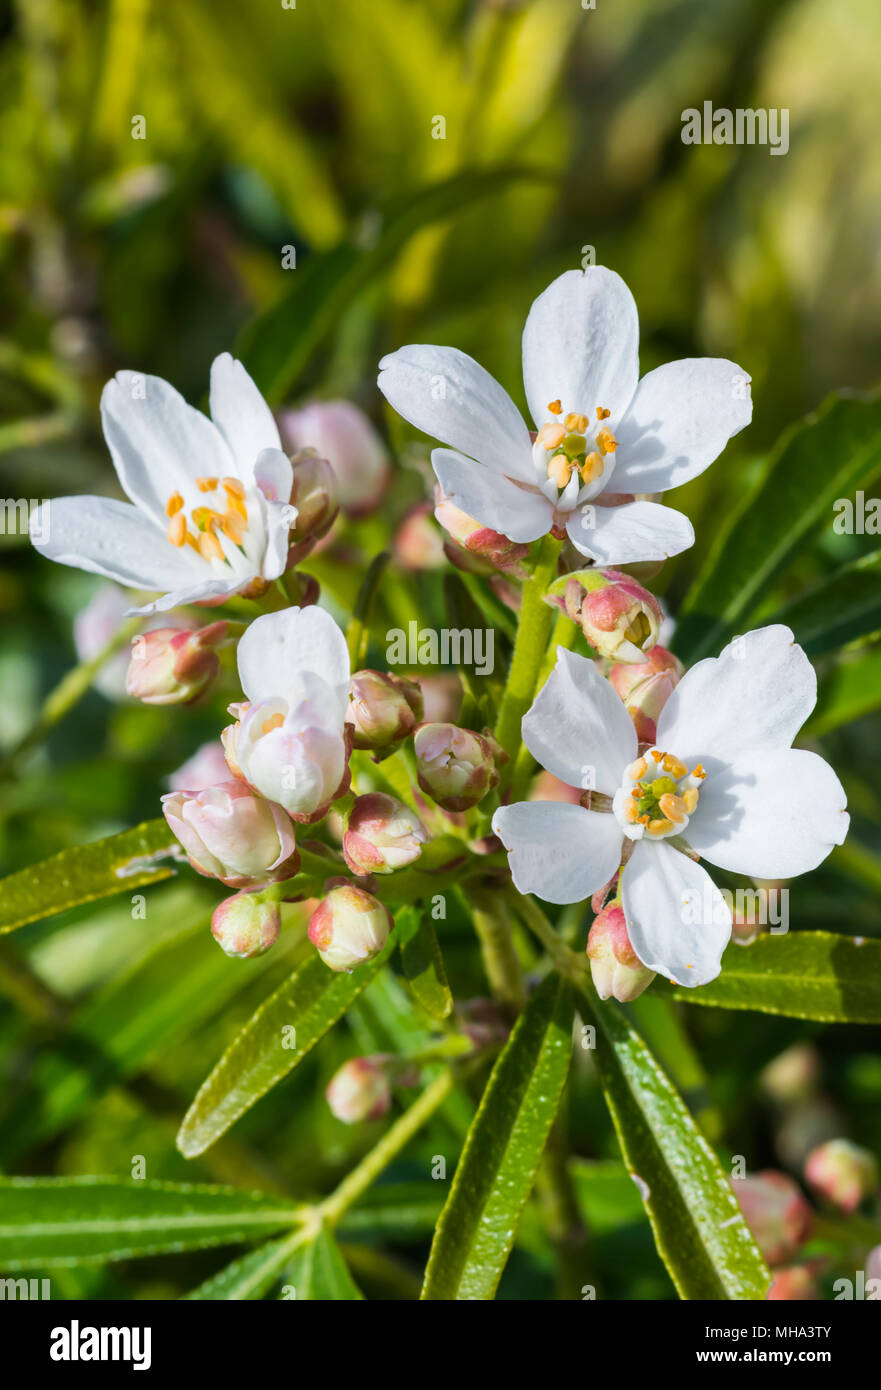 Small white flowers of the Mexican Orange Blossom (Choisya ternata) in late Spring/early Summer in West Sussex, England, UK. Portrait. Stock Photo